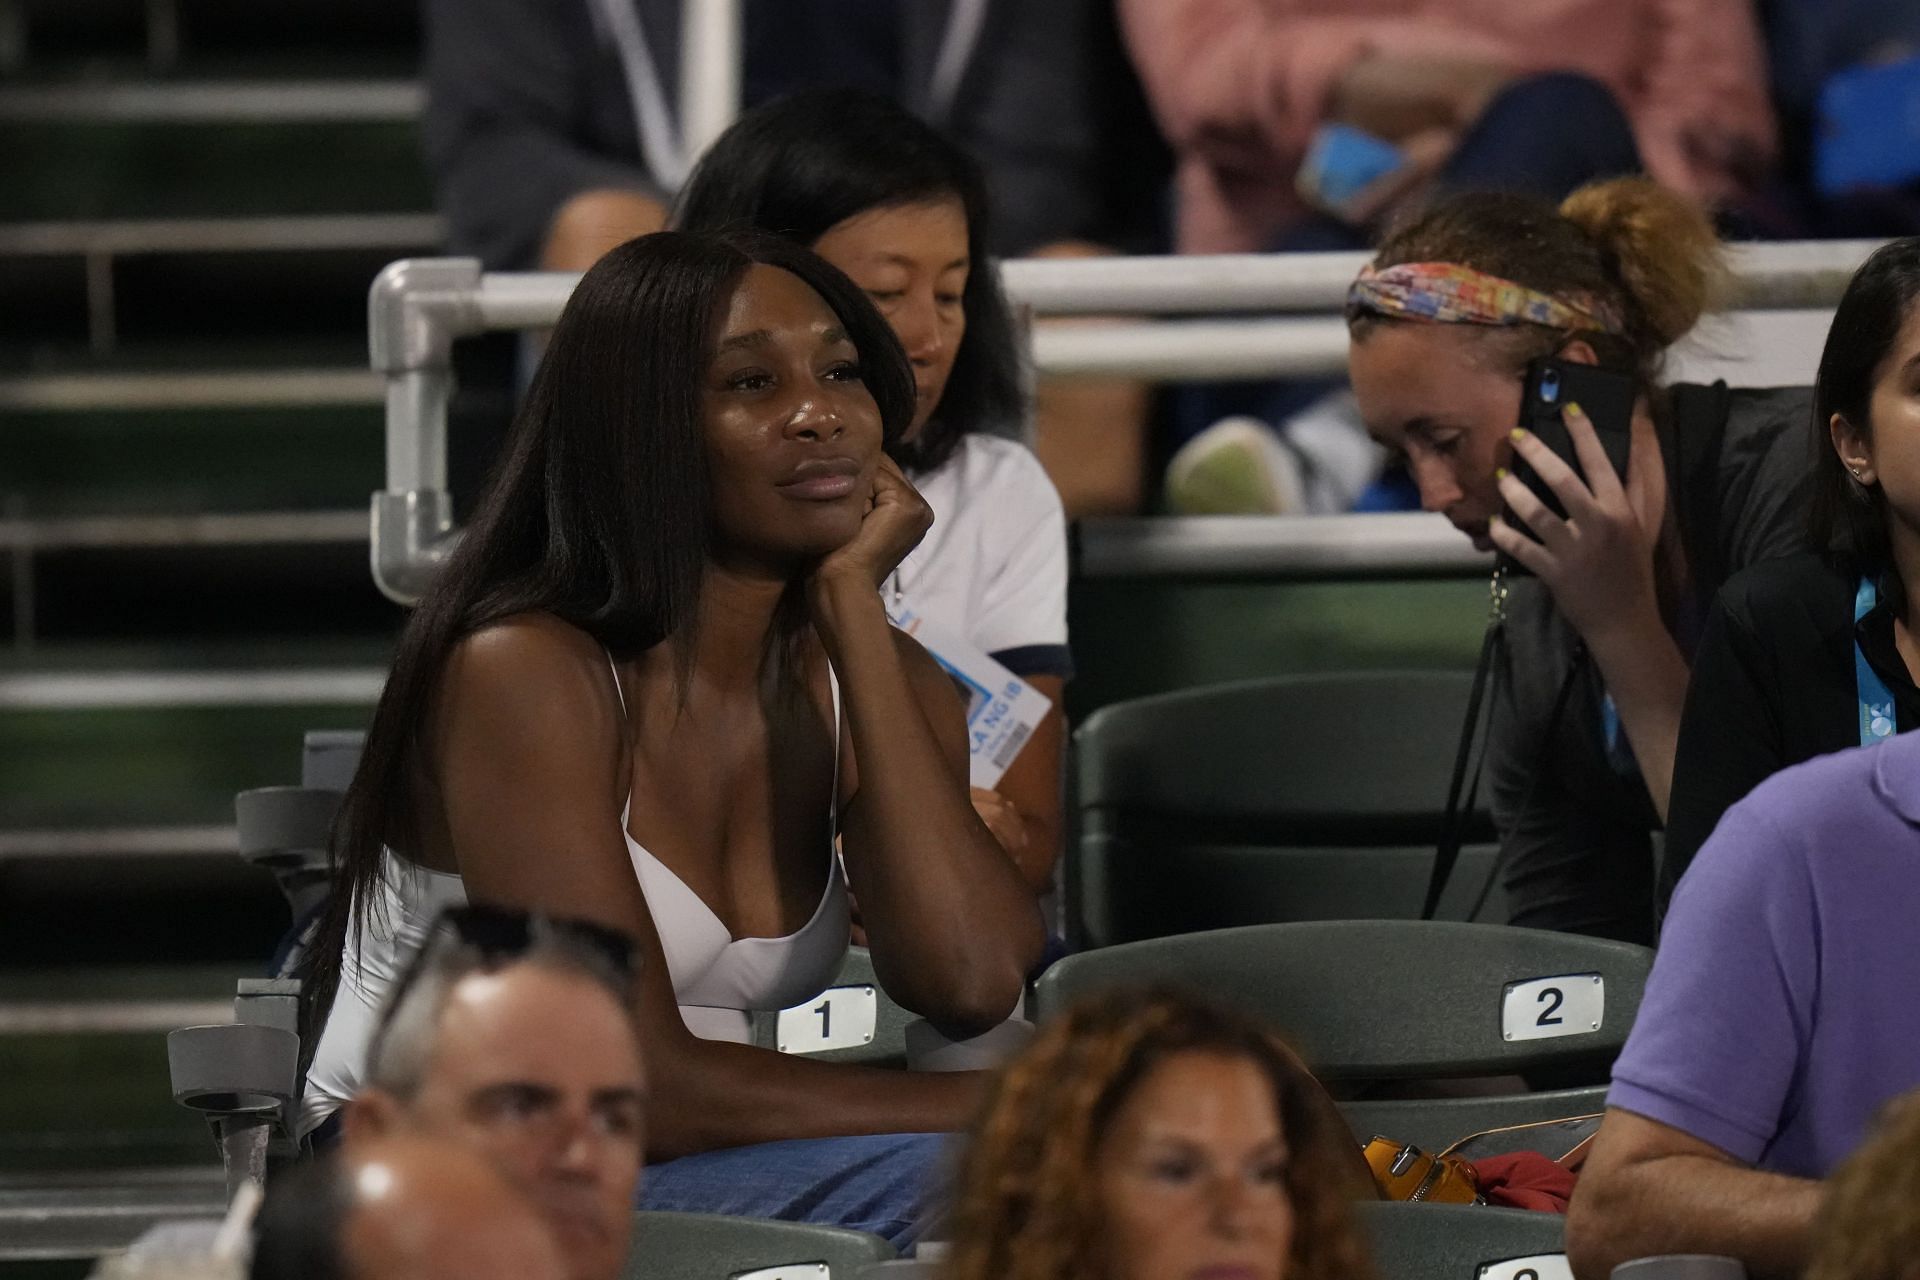 Venus Williams catching some tennis action at the 2022 Delray Beach Open